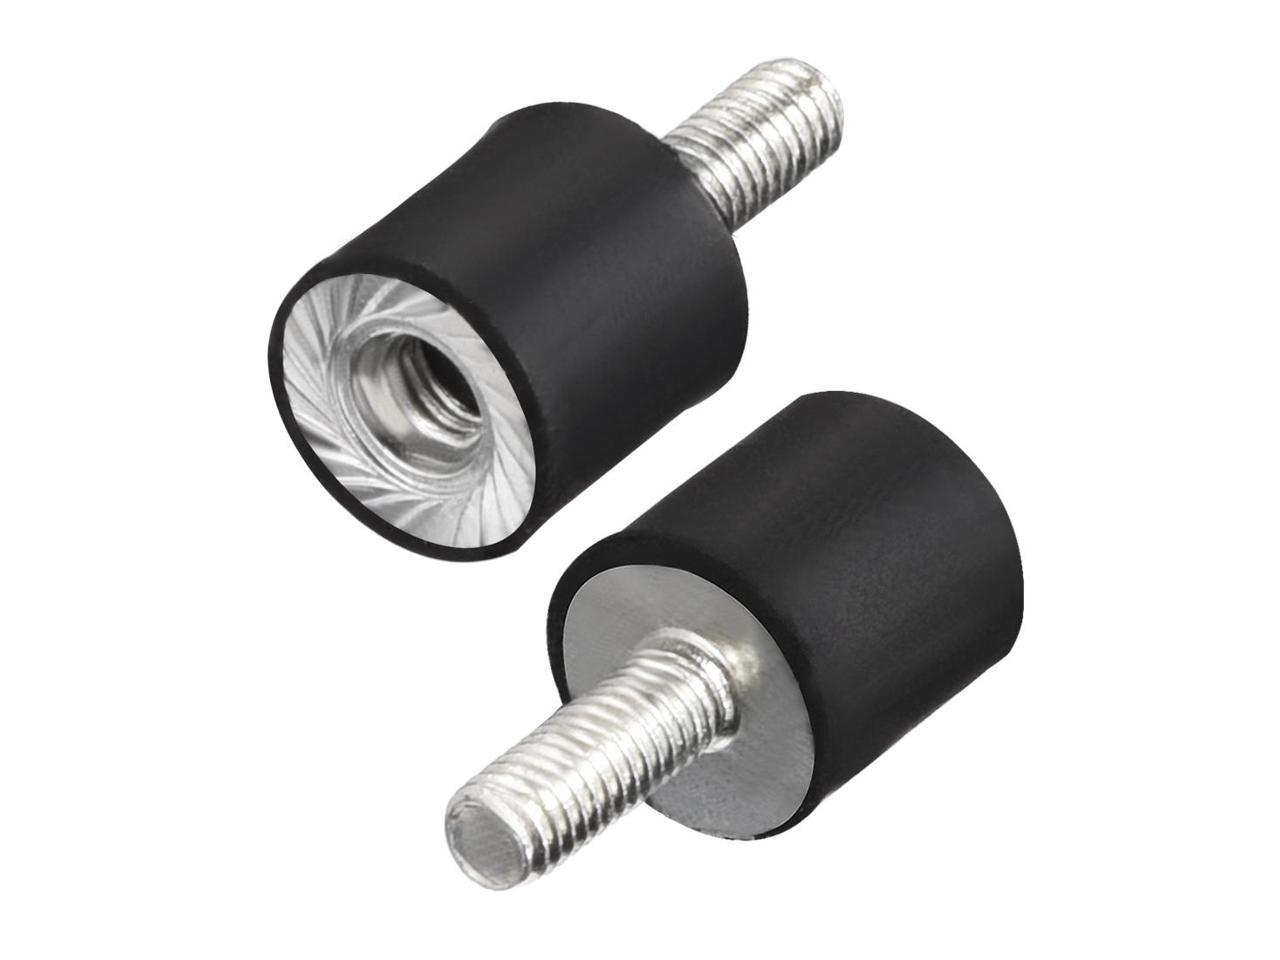 uxcell 8 x 8mm Rubber Mounts,Vibration Isolators,Shock Absorber with M3 x 7.5mm Studs 2pcs 